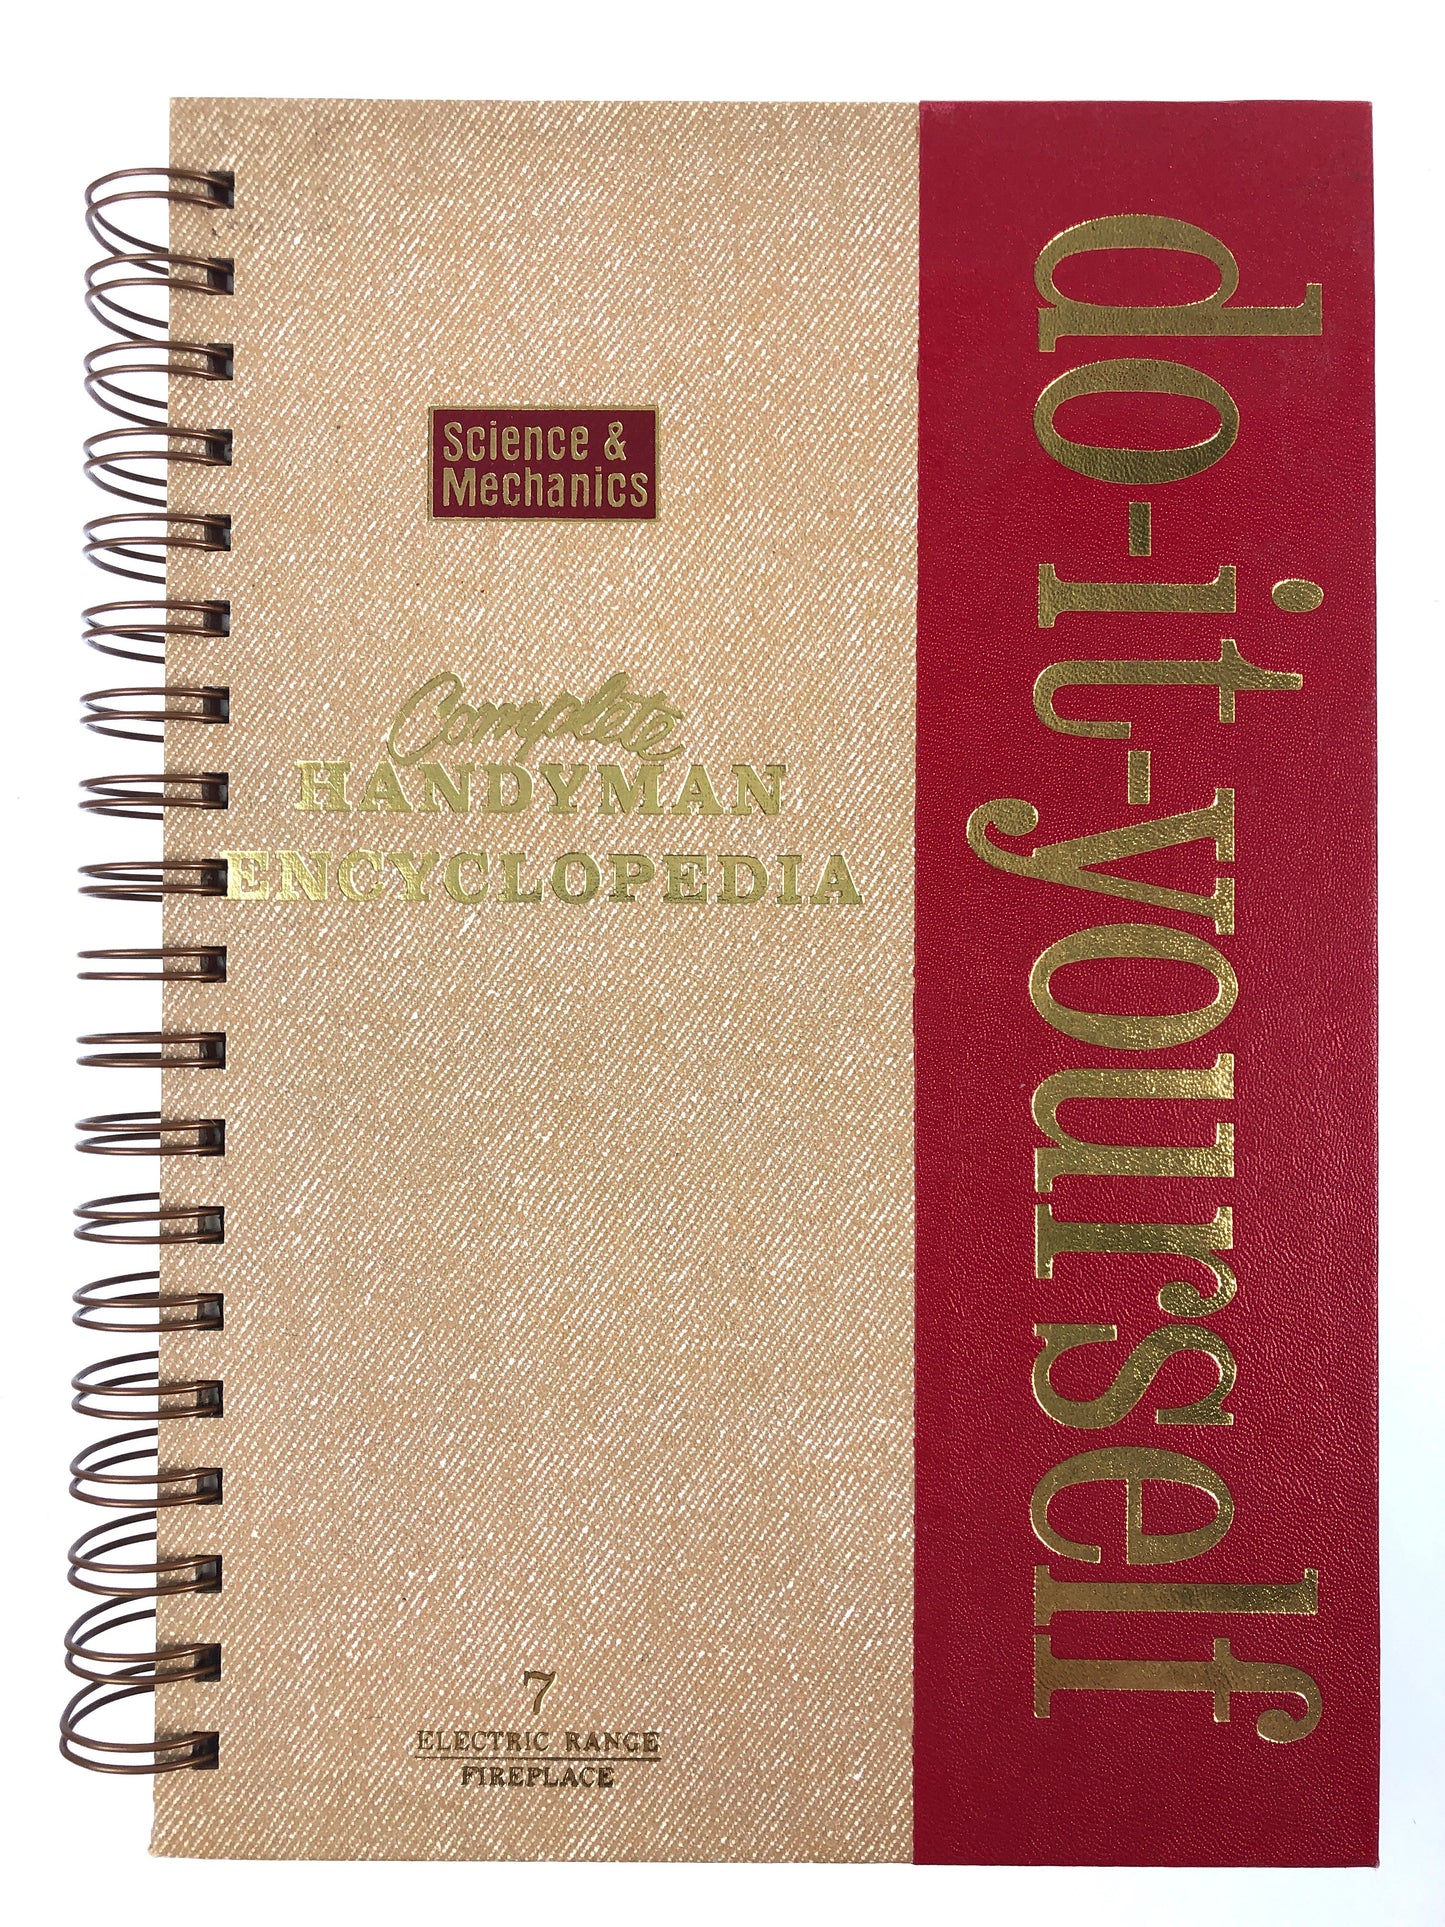 Do It Yourself - Complete Handyman Encyclopedia Journal-Red Barn Collections